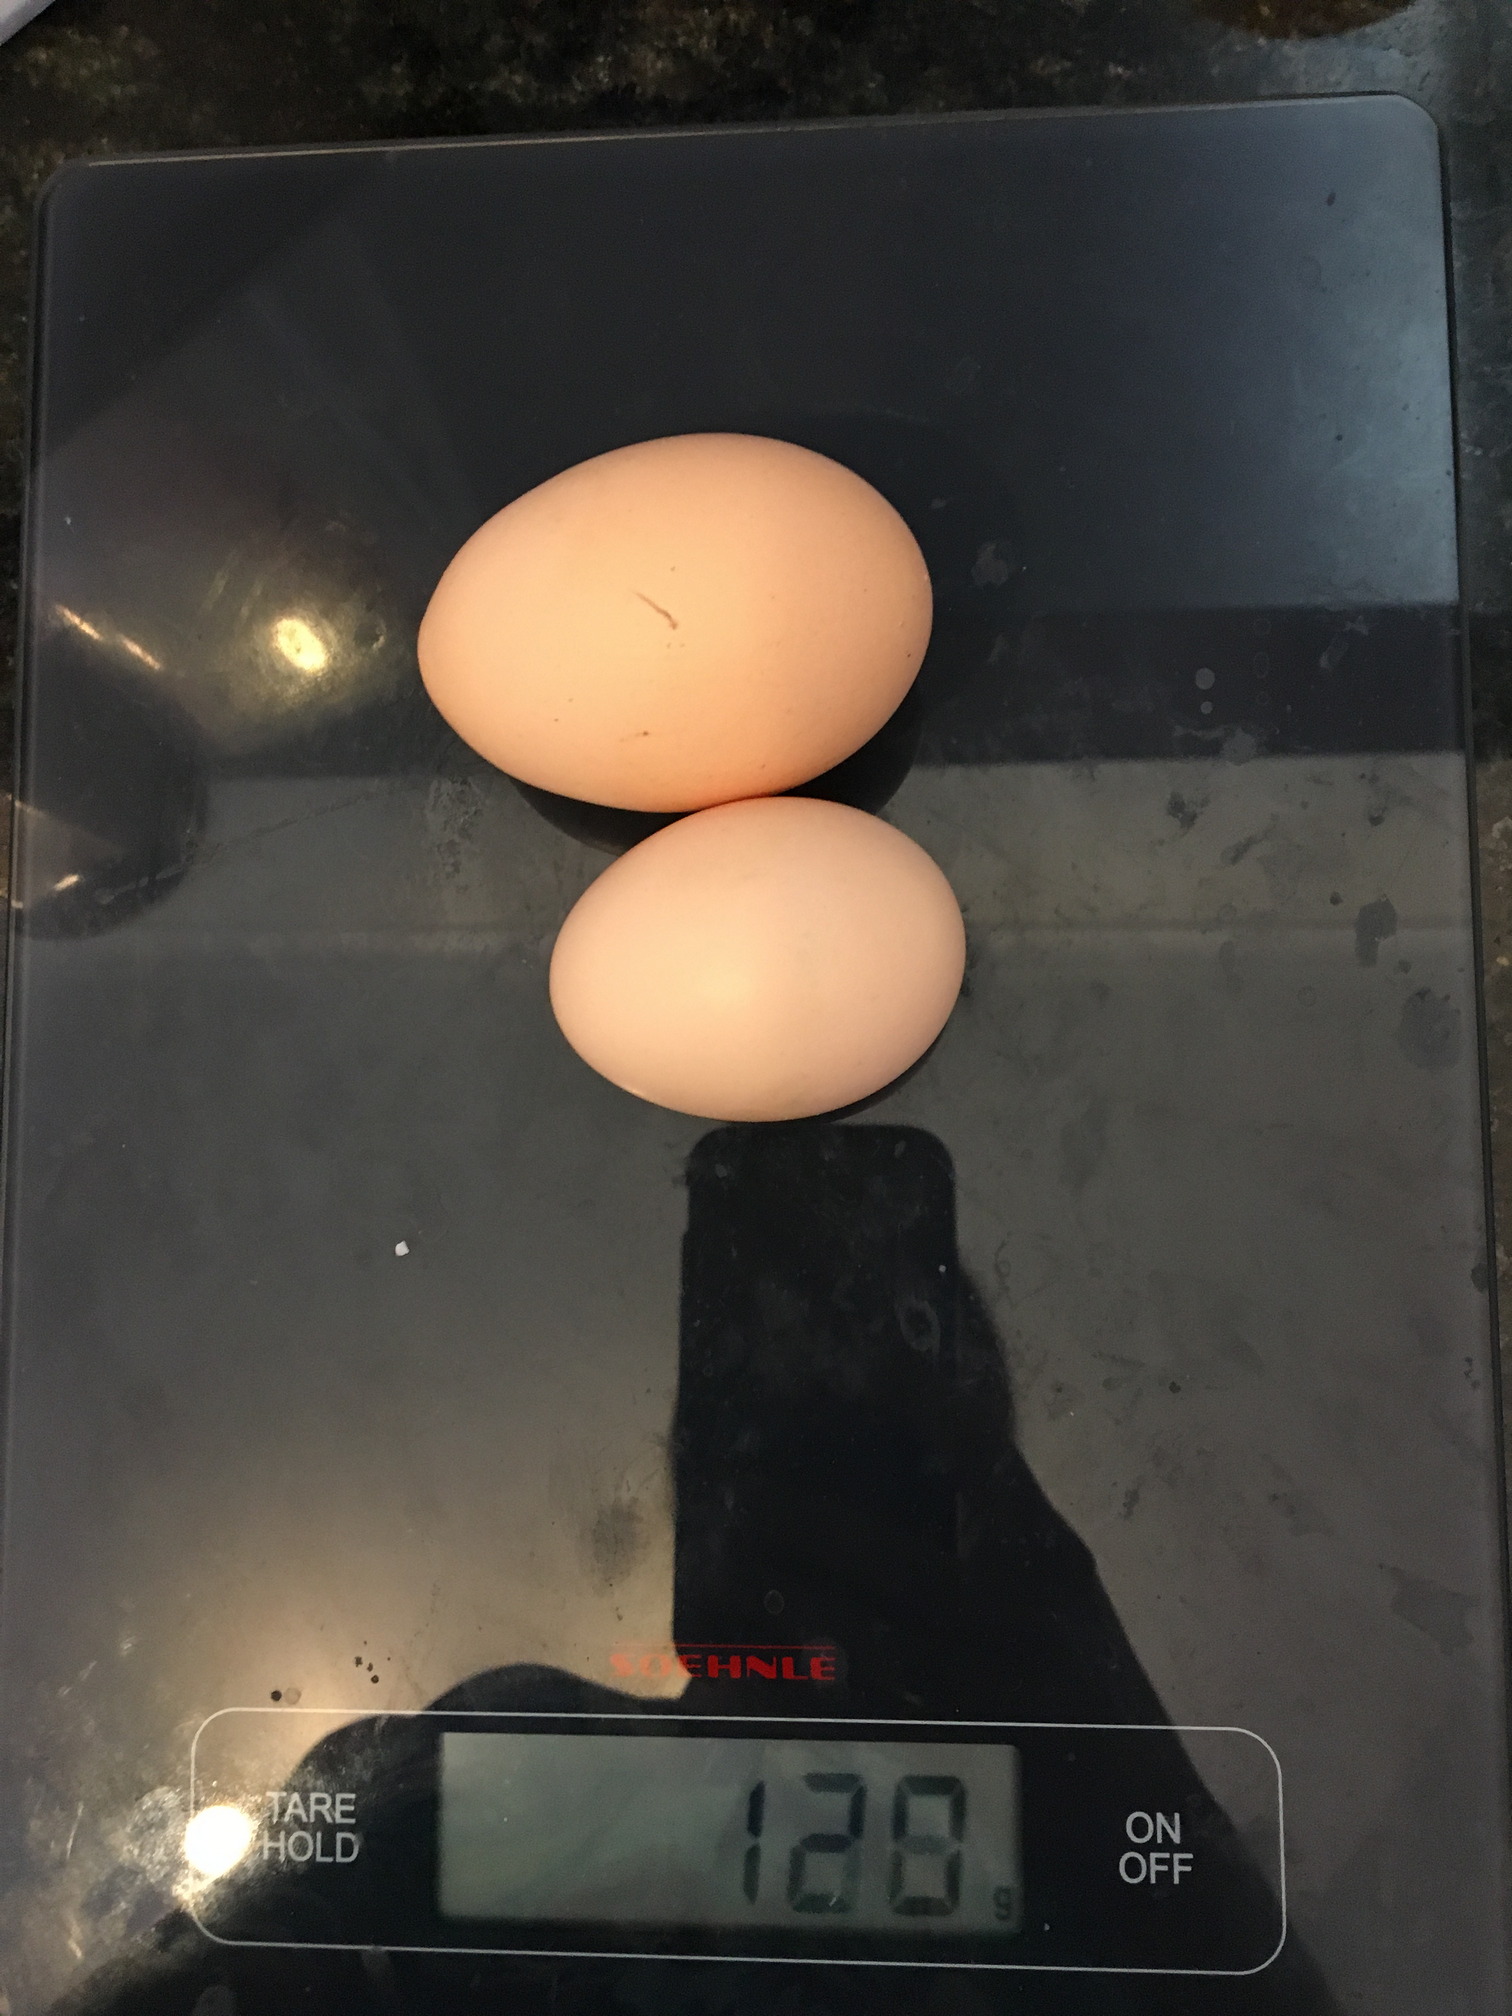 Not all eggs are created equal. Here we have a 73 gram egg and a 47 gram egg. The 73 gram egg turned out to be a double-yolk egg. We've had a few of those now. Great when it happens!